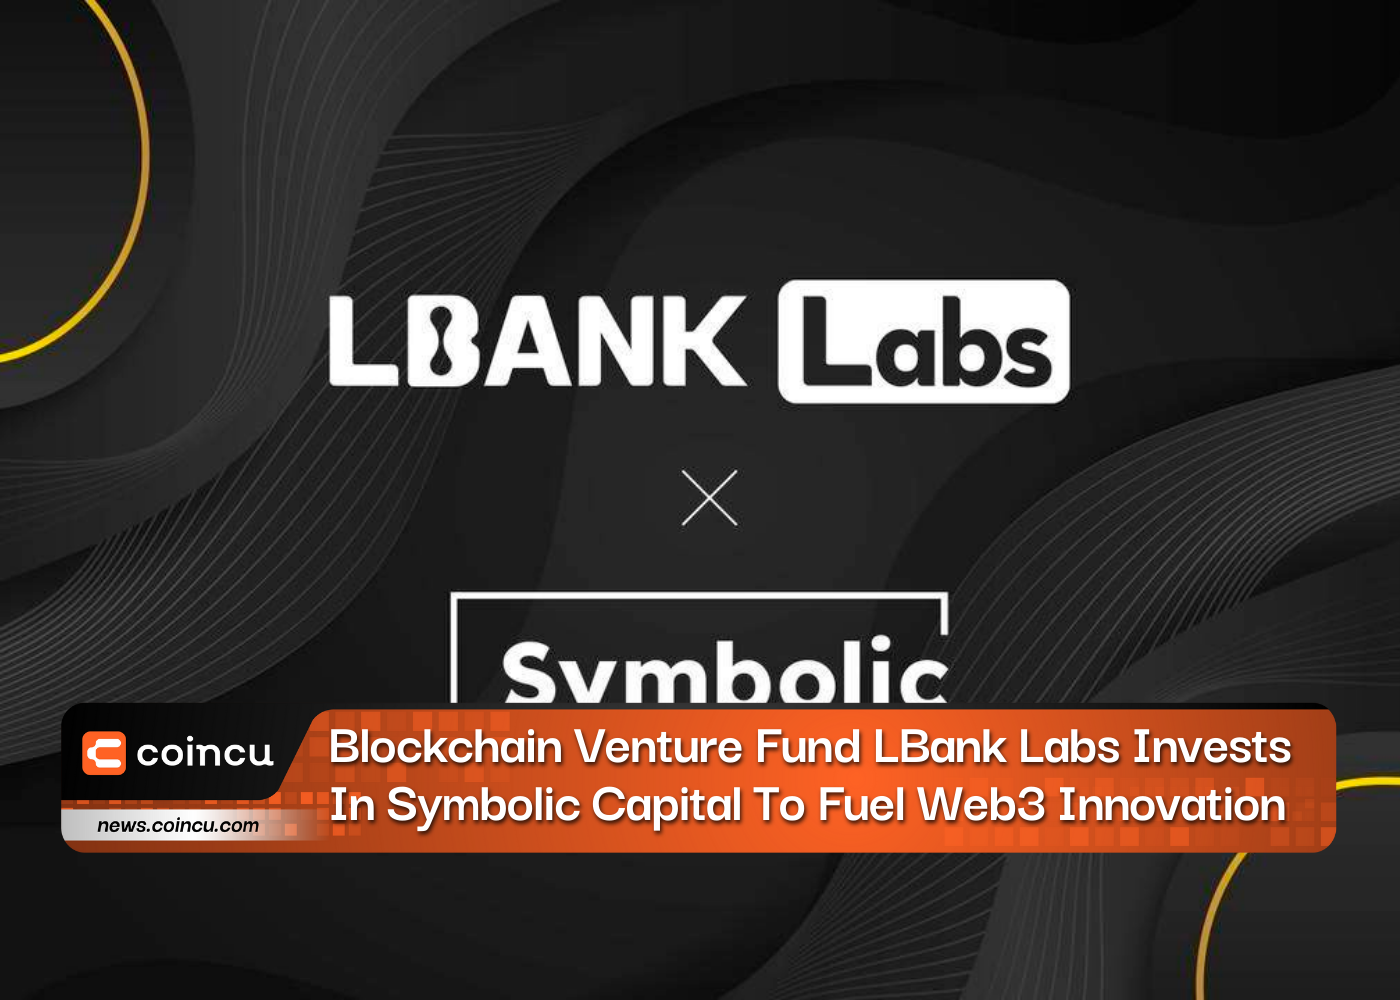 Blockchain Venture Fund LBank Labs Invests In Symbolic Capital To Fuel Web3 Innovation